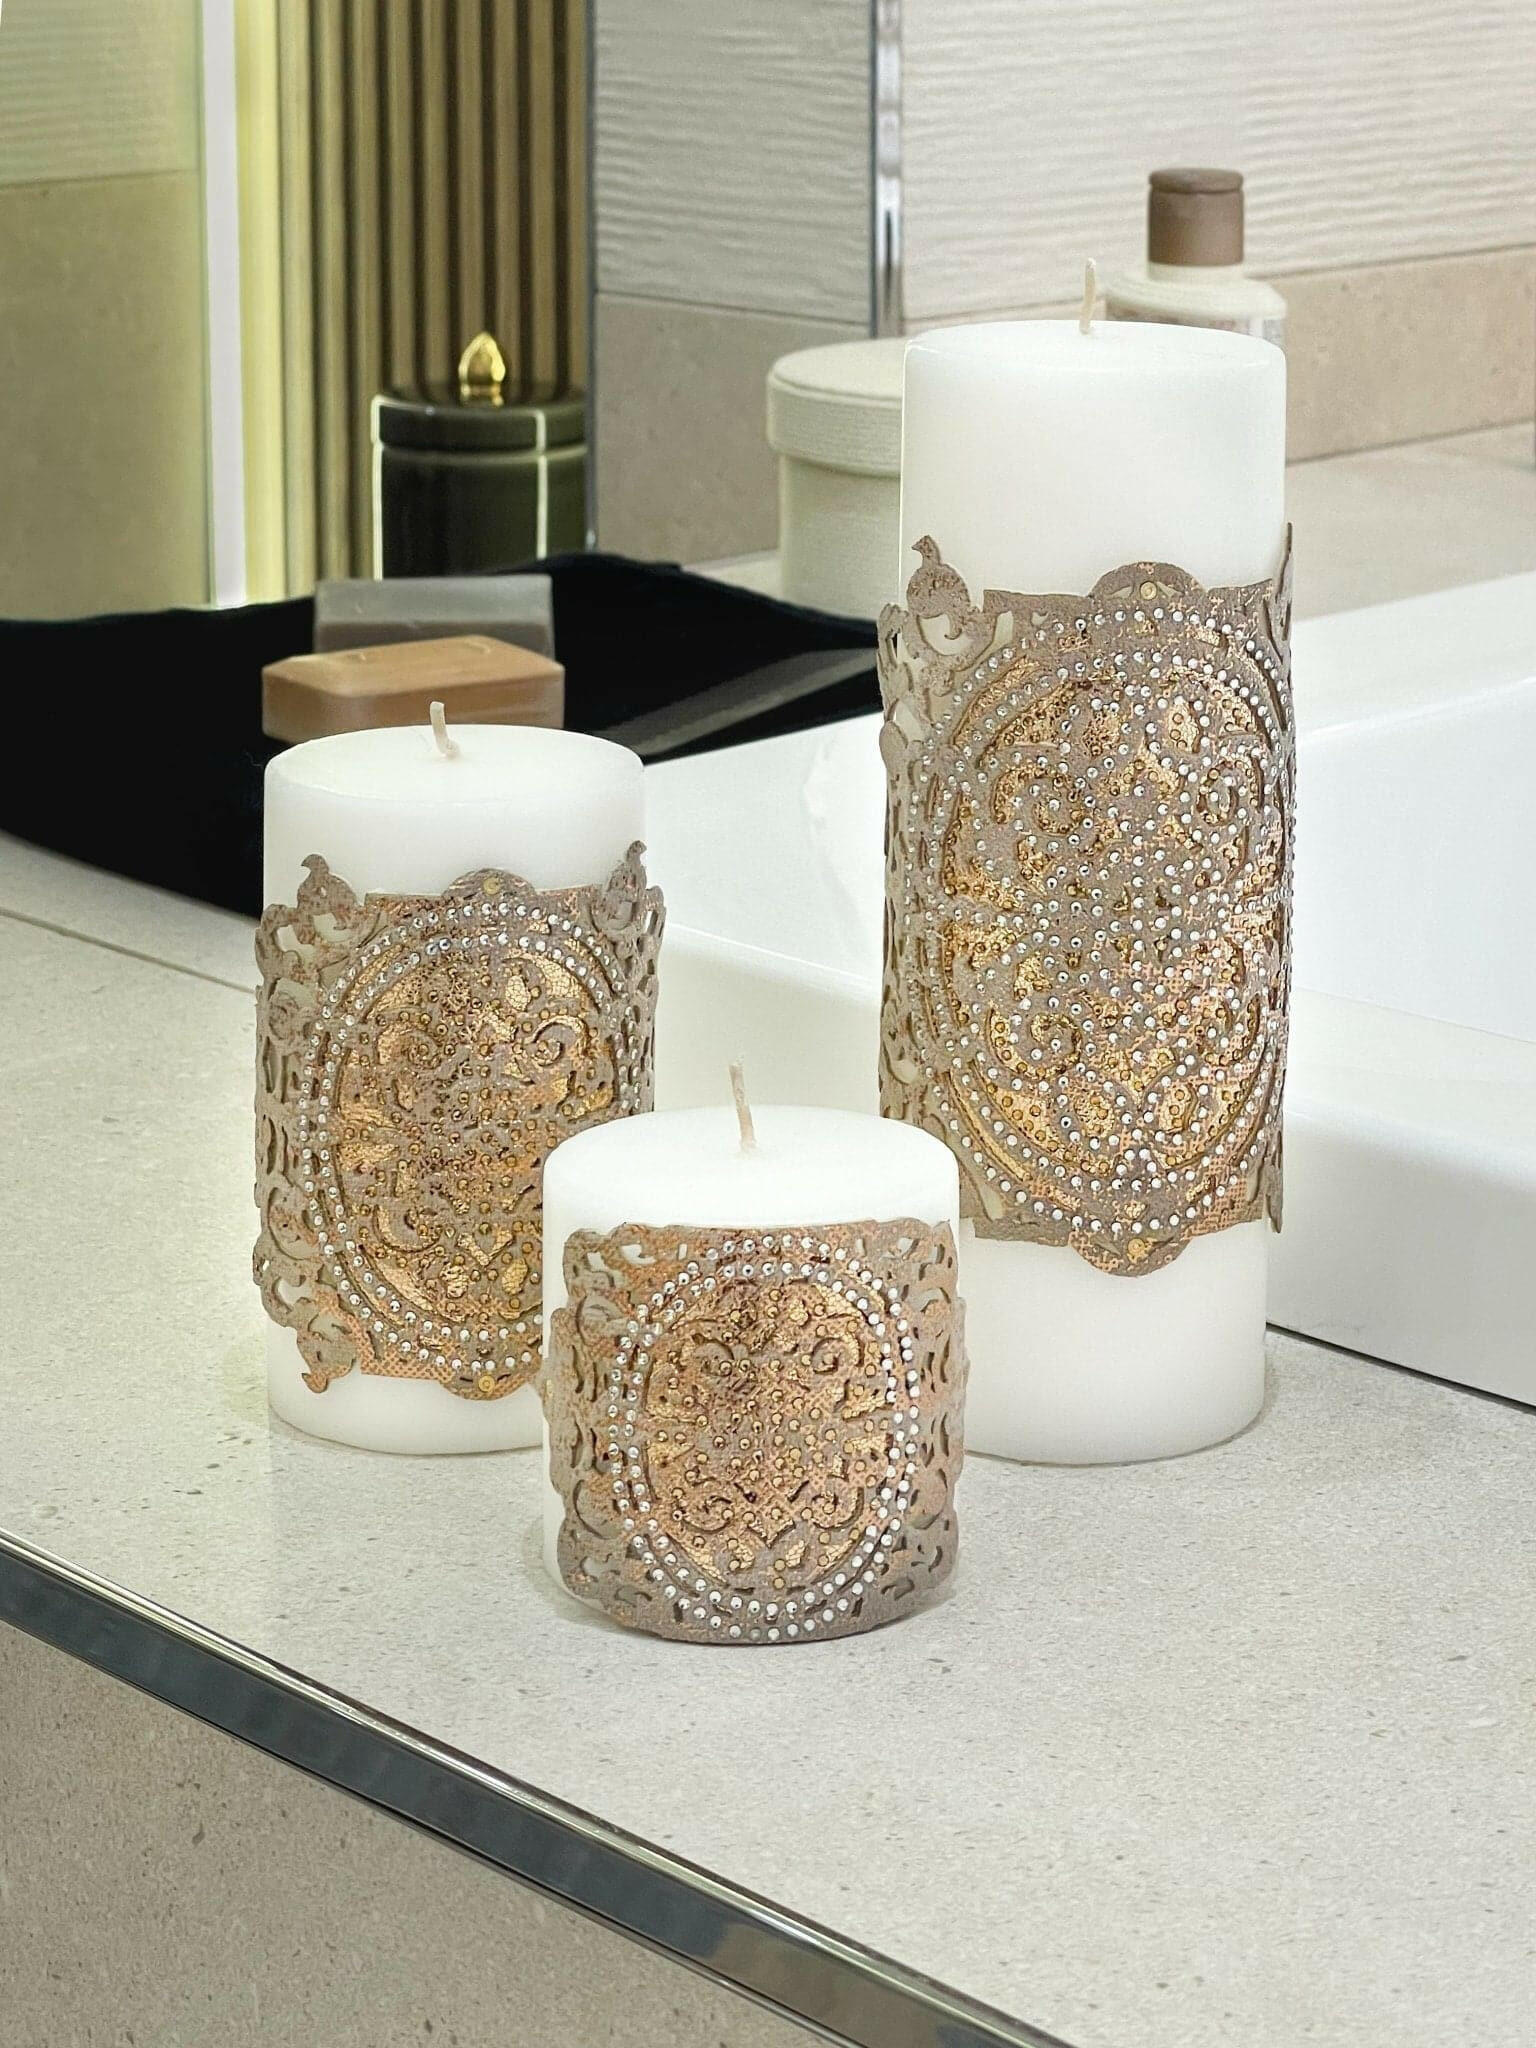 Ruya Copper Leather Applied Candle Set of 3, Royal Style Luxury Decorative Candles from Creative Home